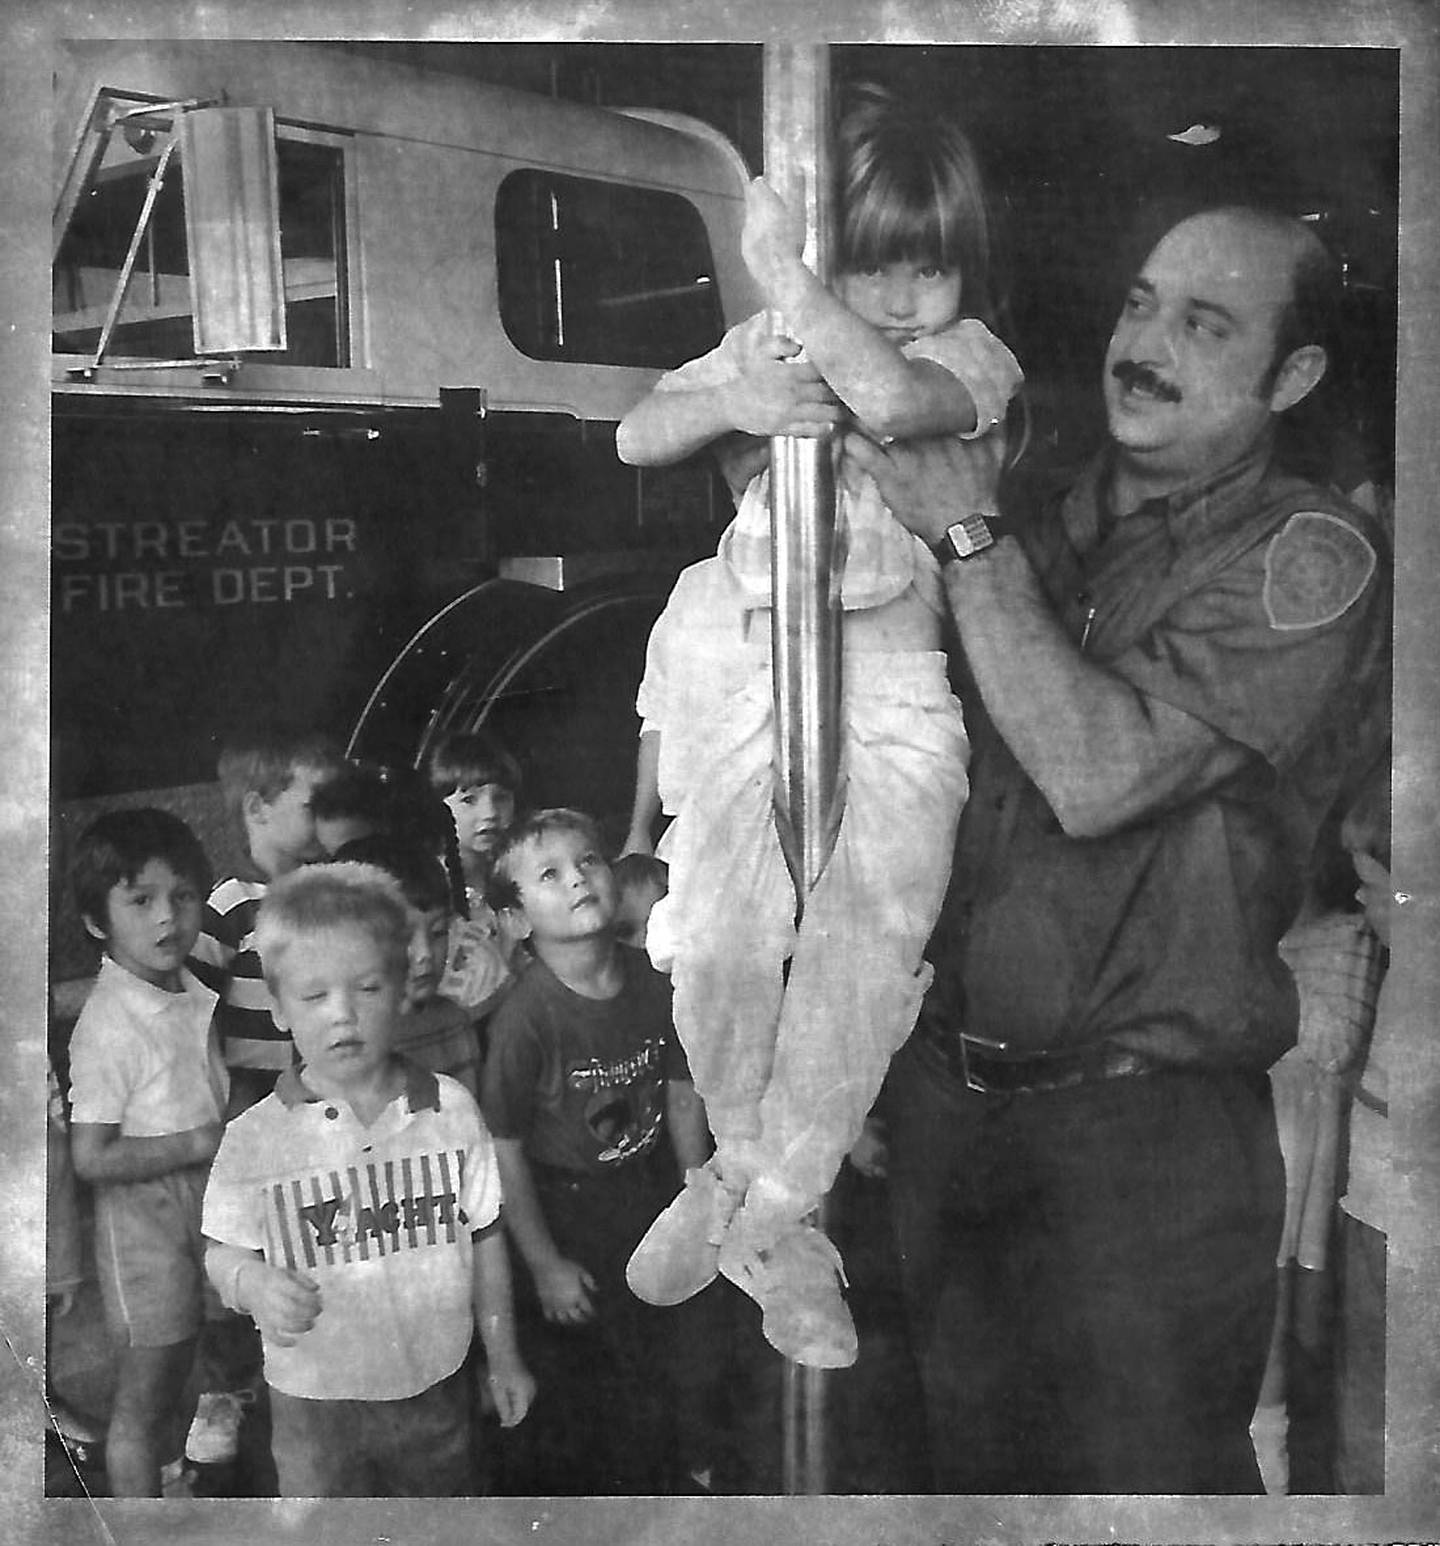 A Holy Trinity Lutheran preschool class of 1988 visits the Streator Fire Department.